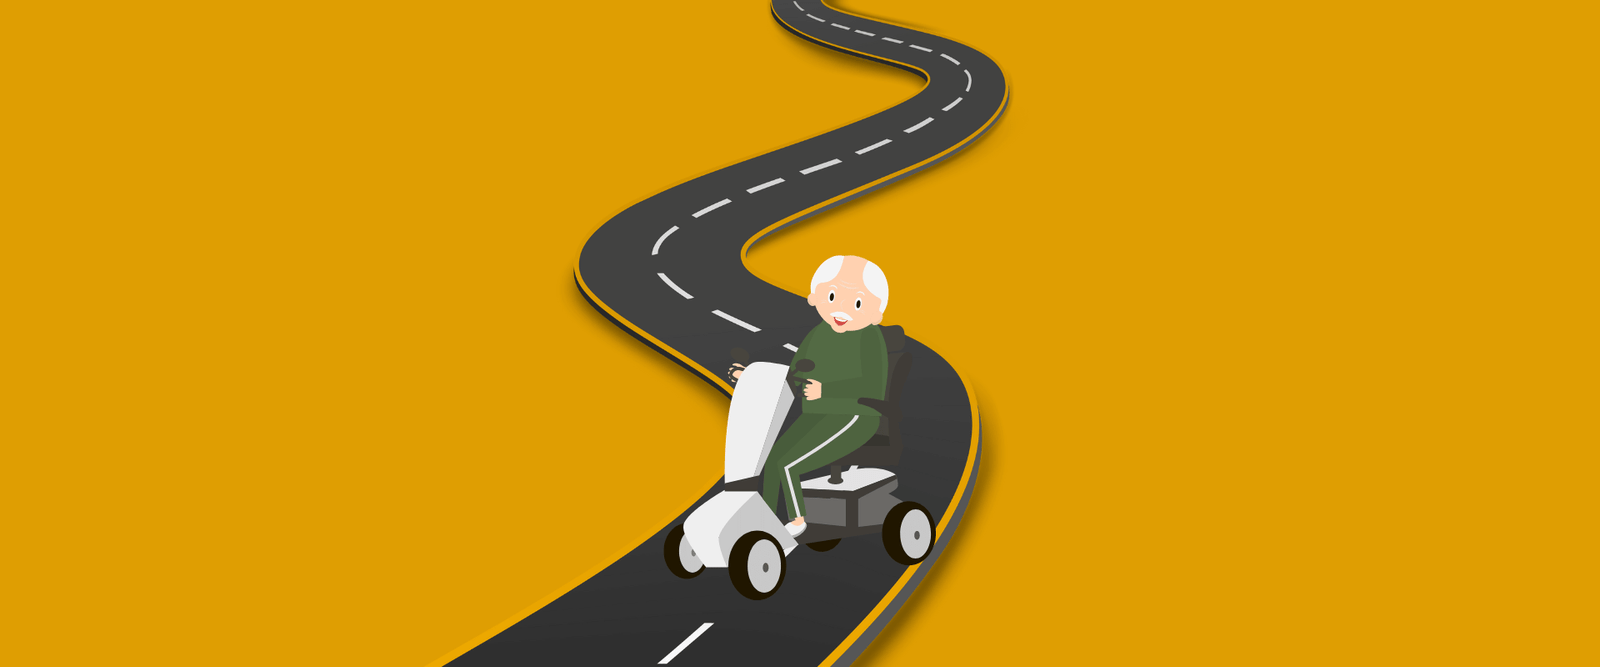 Are Mobility Scooters Allowed on the Road In The UK?